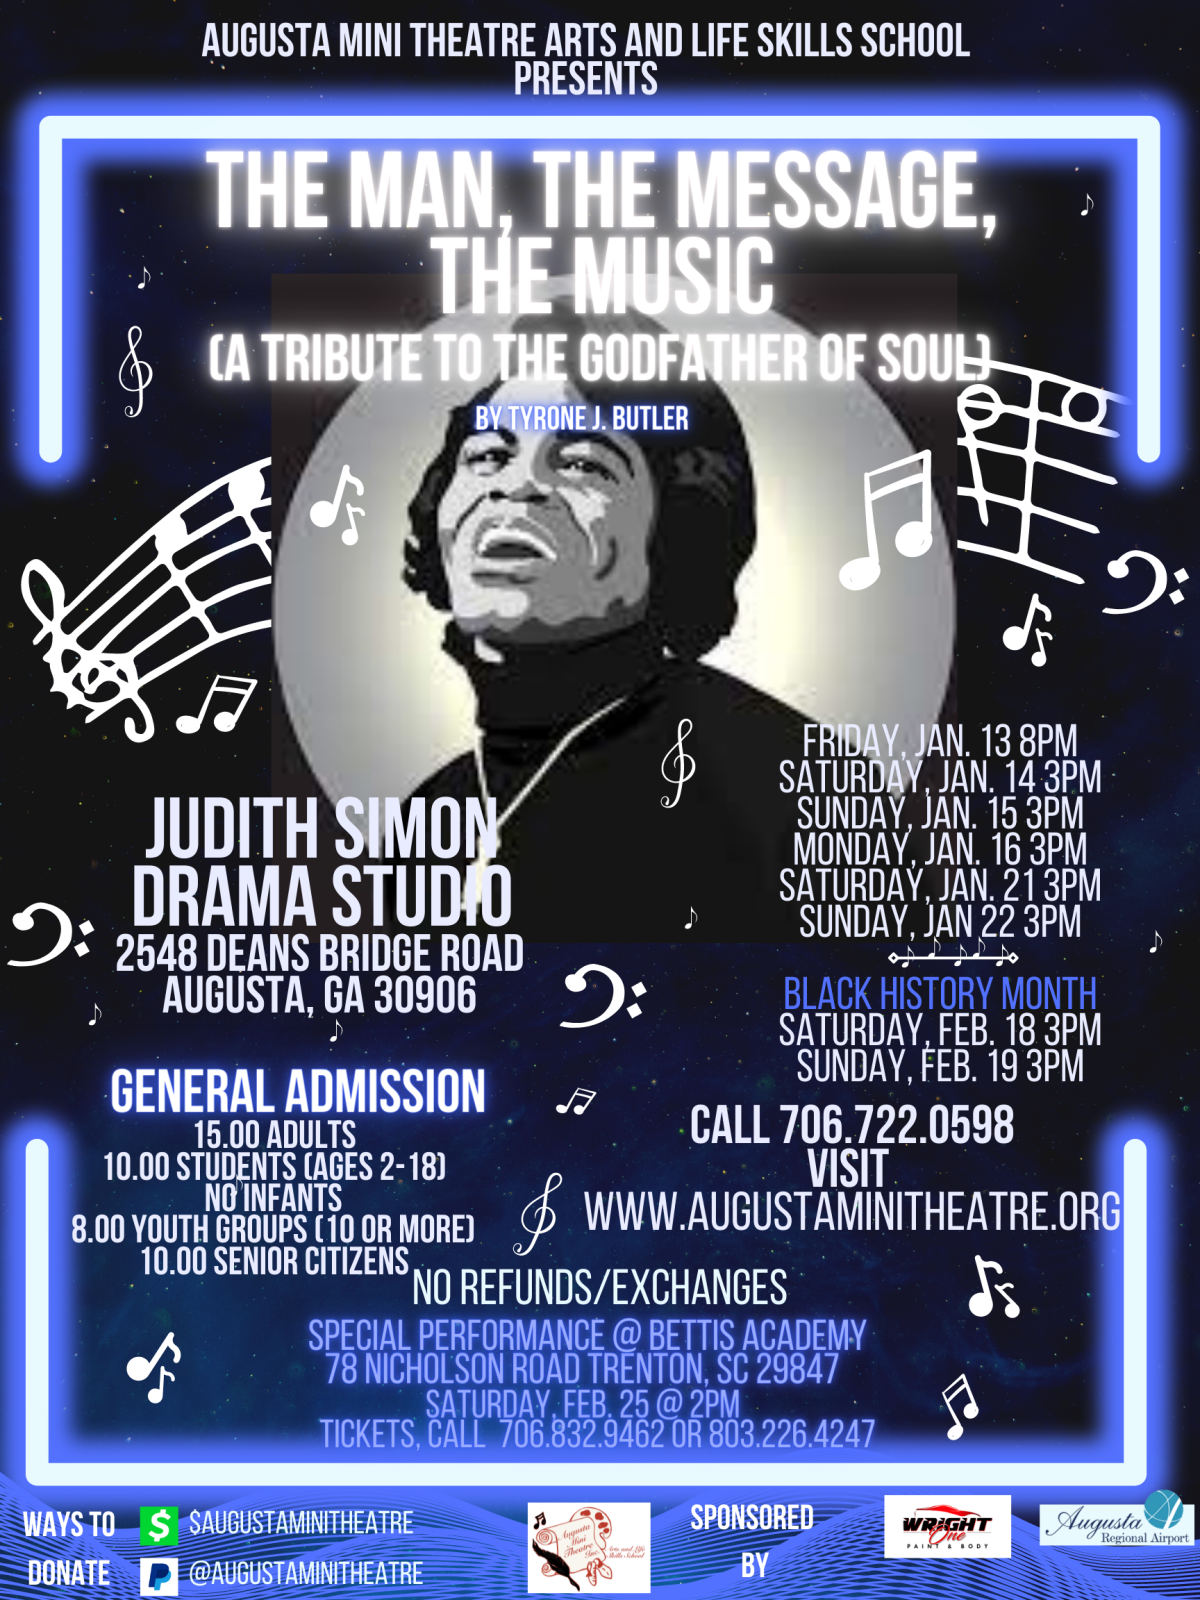 The-Man-The-Message-The-Music-Flyer_8D5C3486-7C95-47D0-AB1B53EB86C36C81_7108f932-4f73-4a60-a54eb29c87b2d340.png